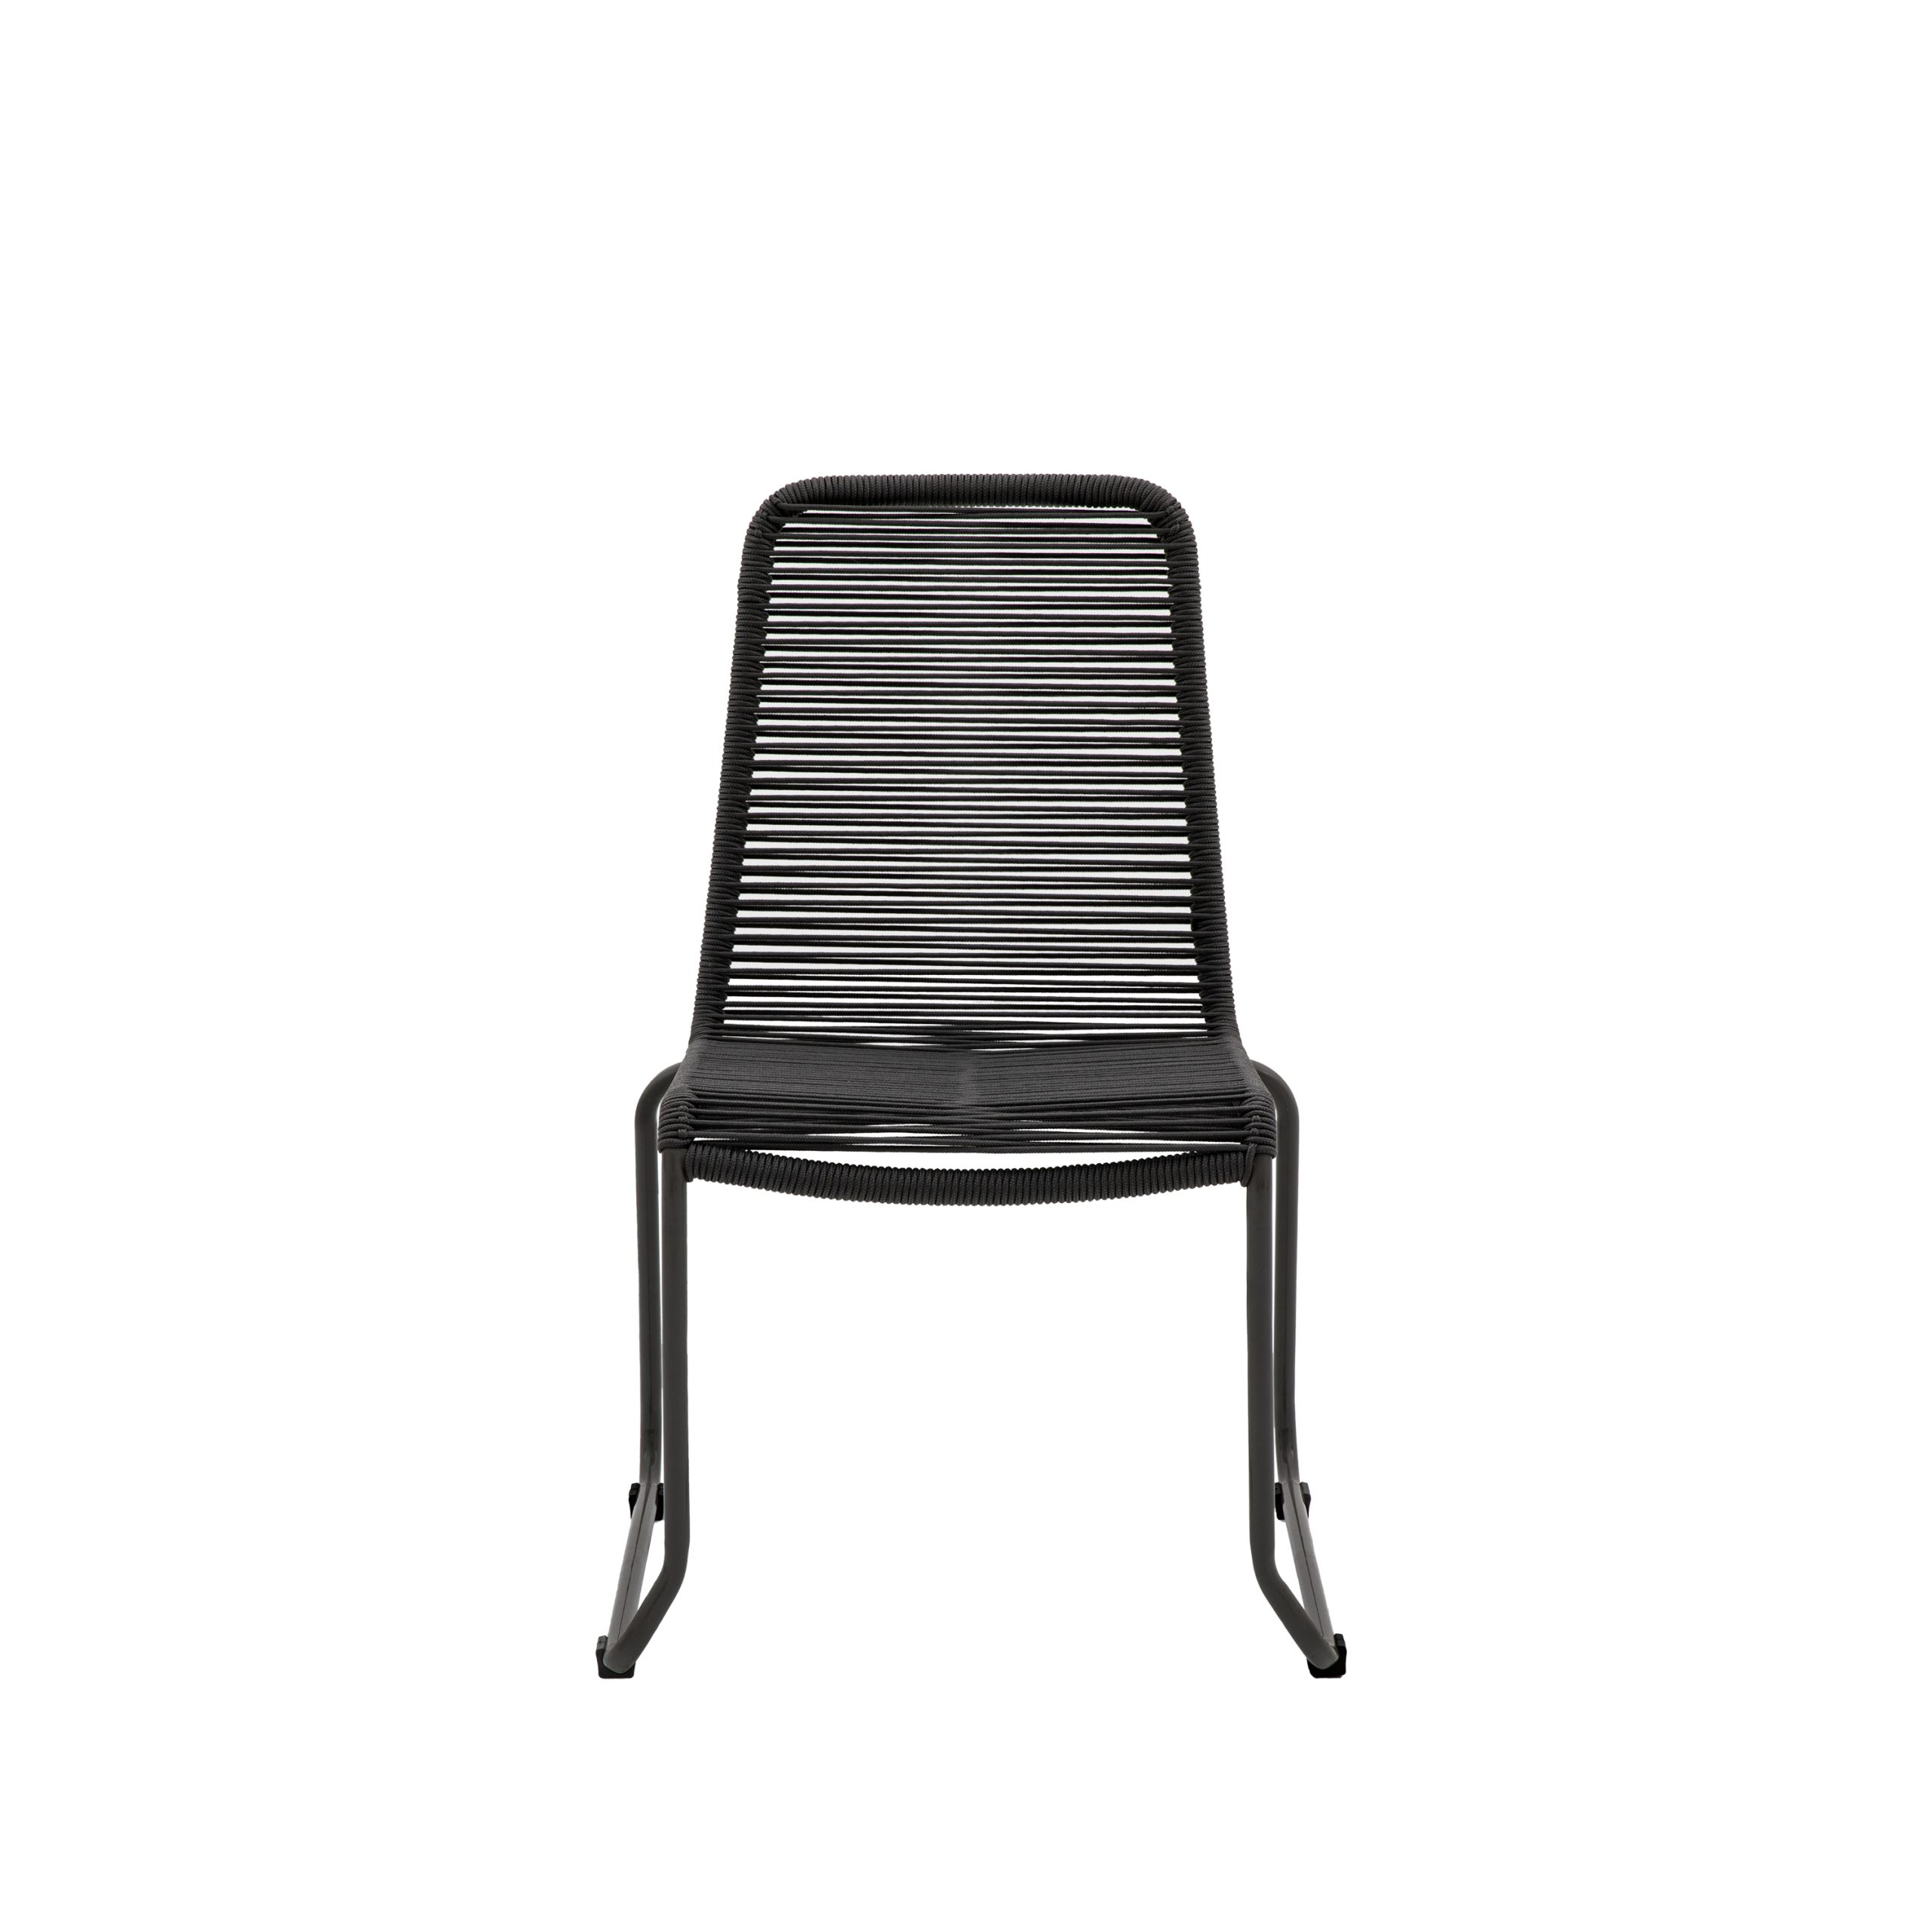 Gallery Outdoor Corletto Dining Chair Black (2pk)